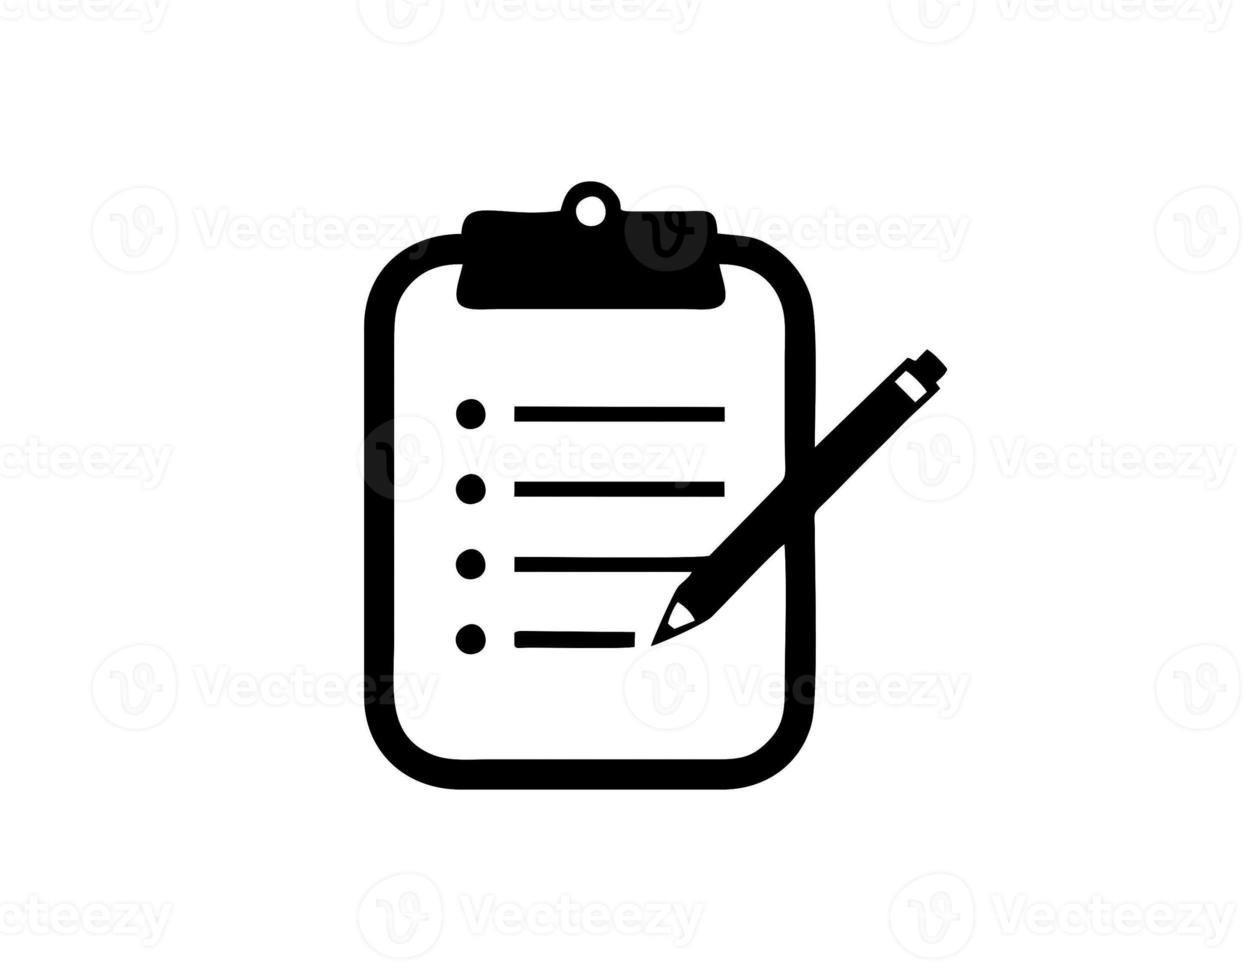 pencil icon in black vector image, illustration of pencil in black on white background, a pen design on a white background photo